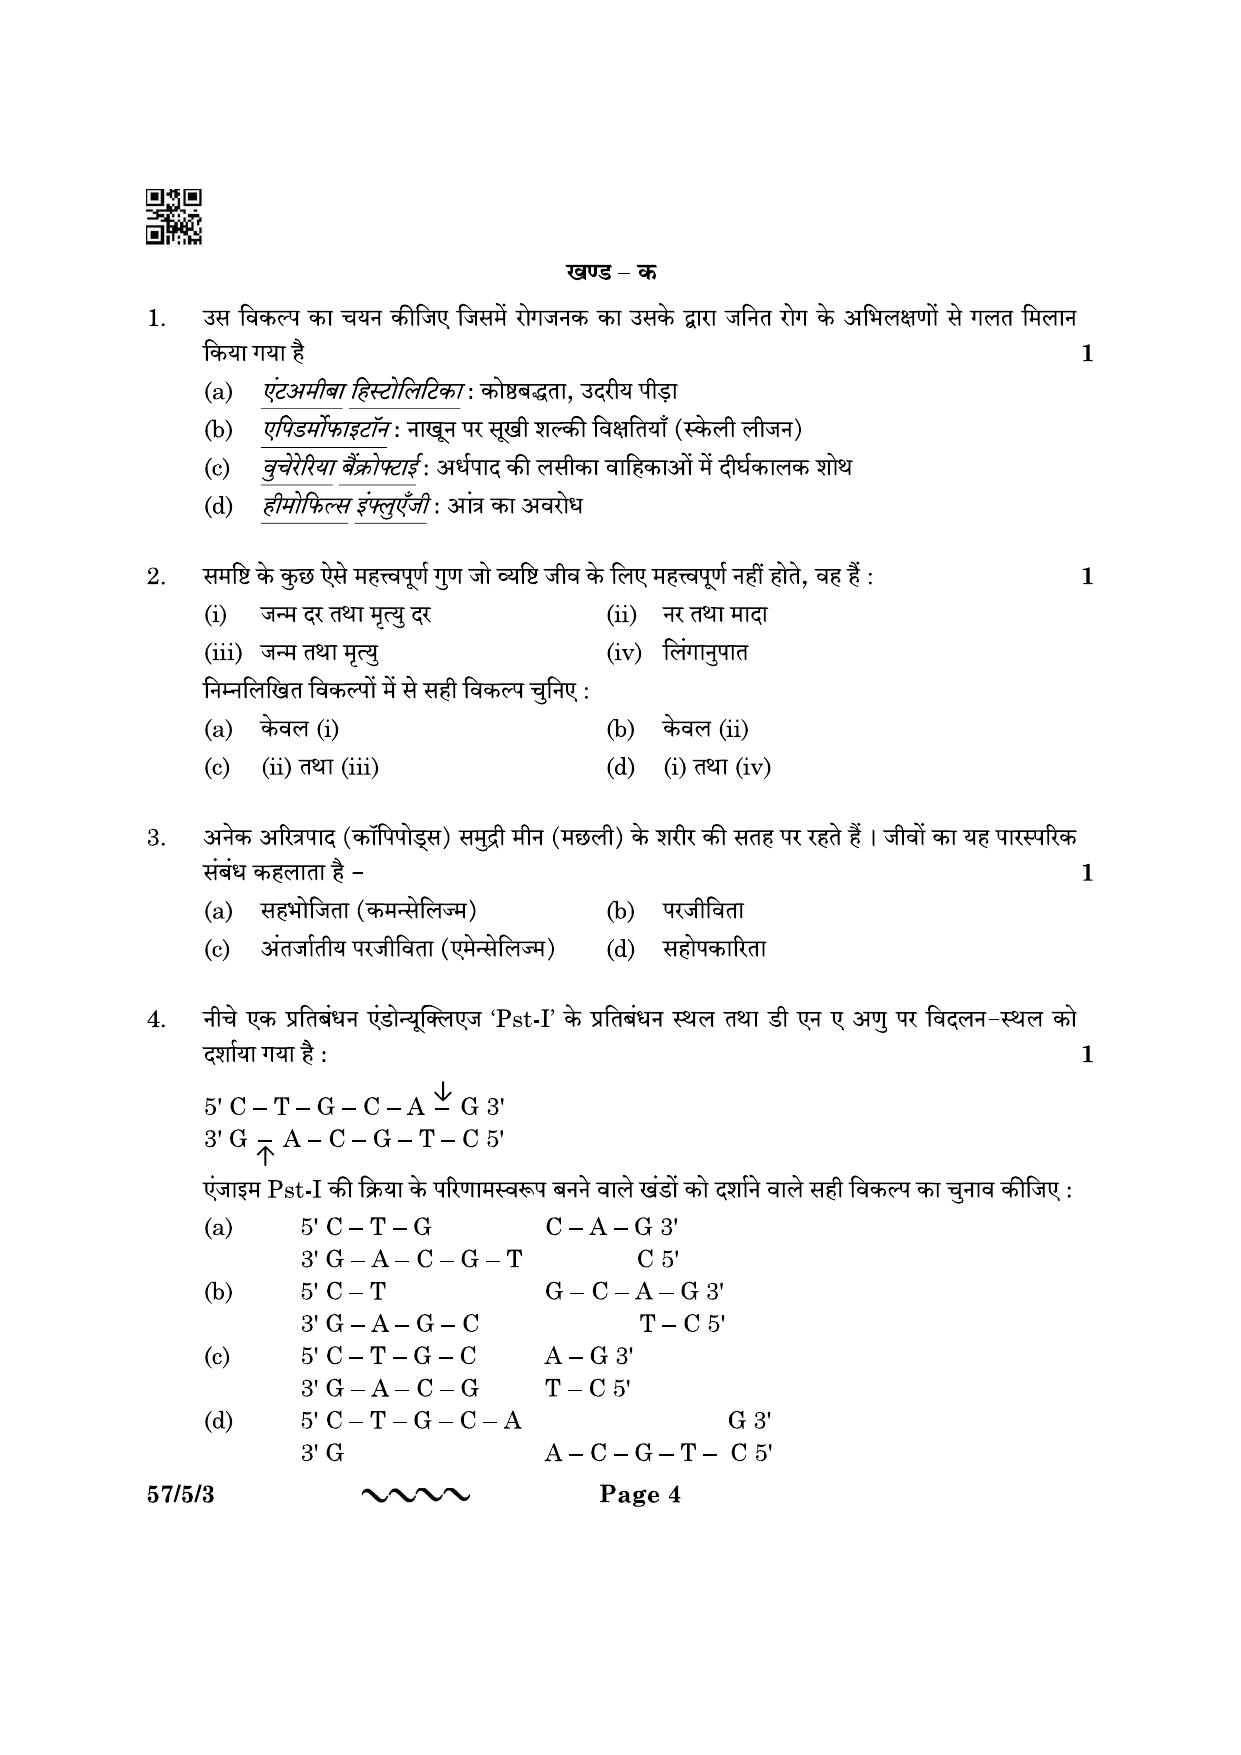 CBSE Class 12 57-5-3 Biology 2023 Question Paper - Page 4